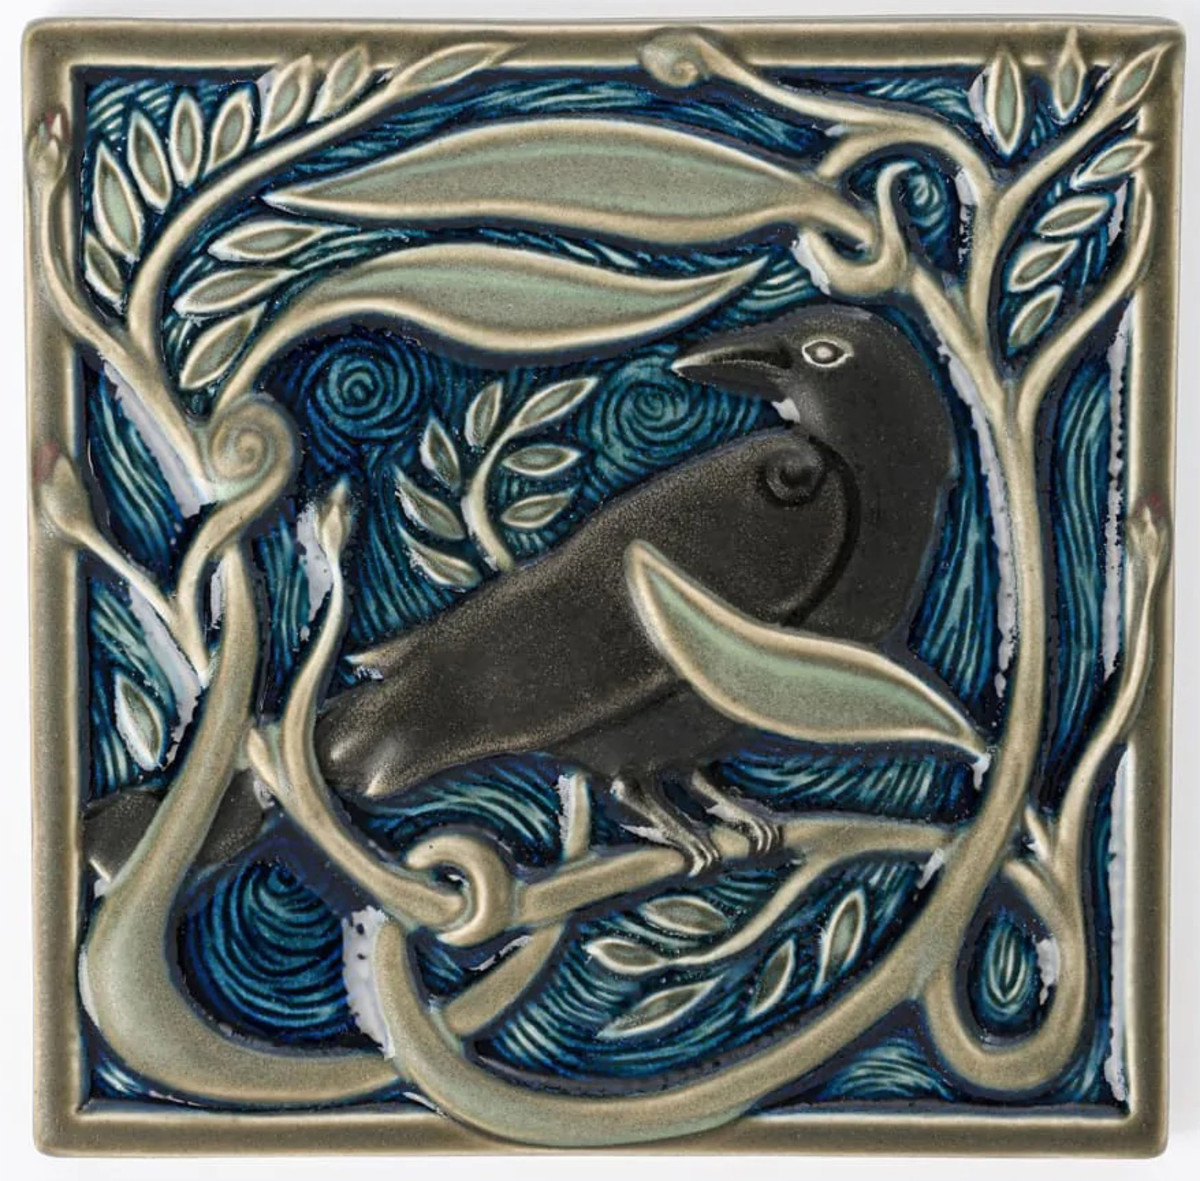 Hand-painted revival-style raven tile by Rookwood Pottery.